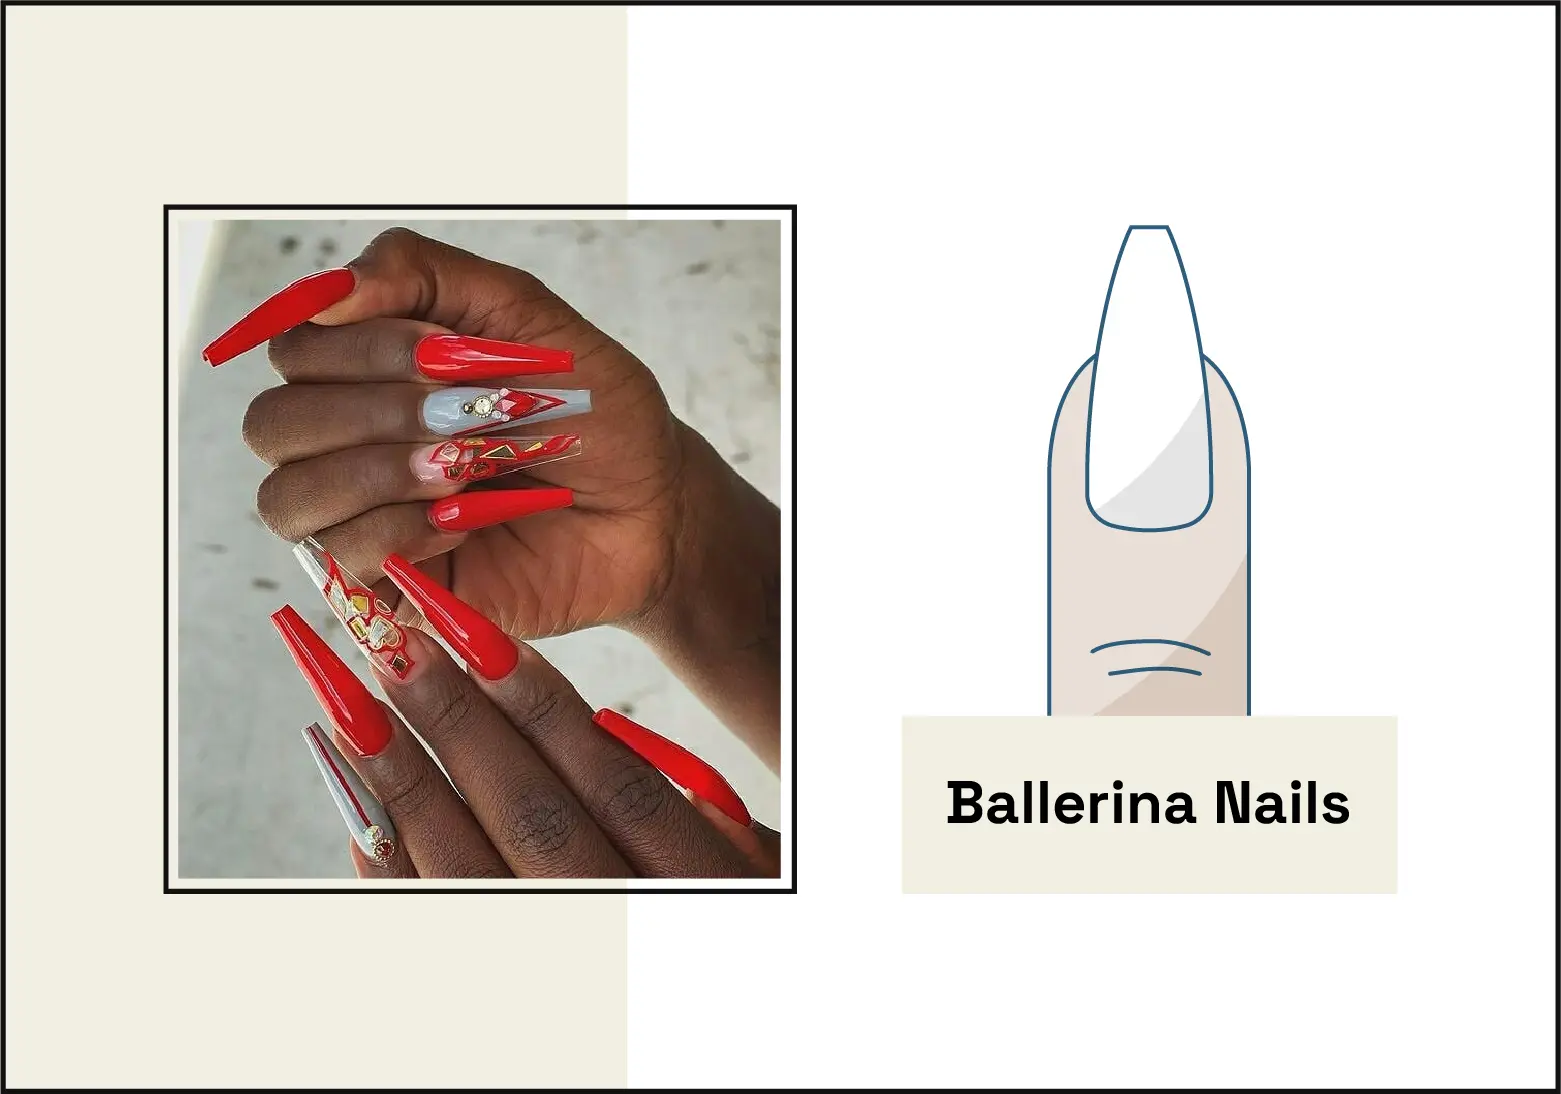 photo of manicure with ballerina-shaped nails with red, gold and silver nail art on the left, illustration of the ballerina nail shape on the right